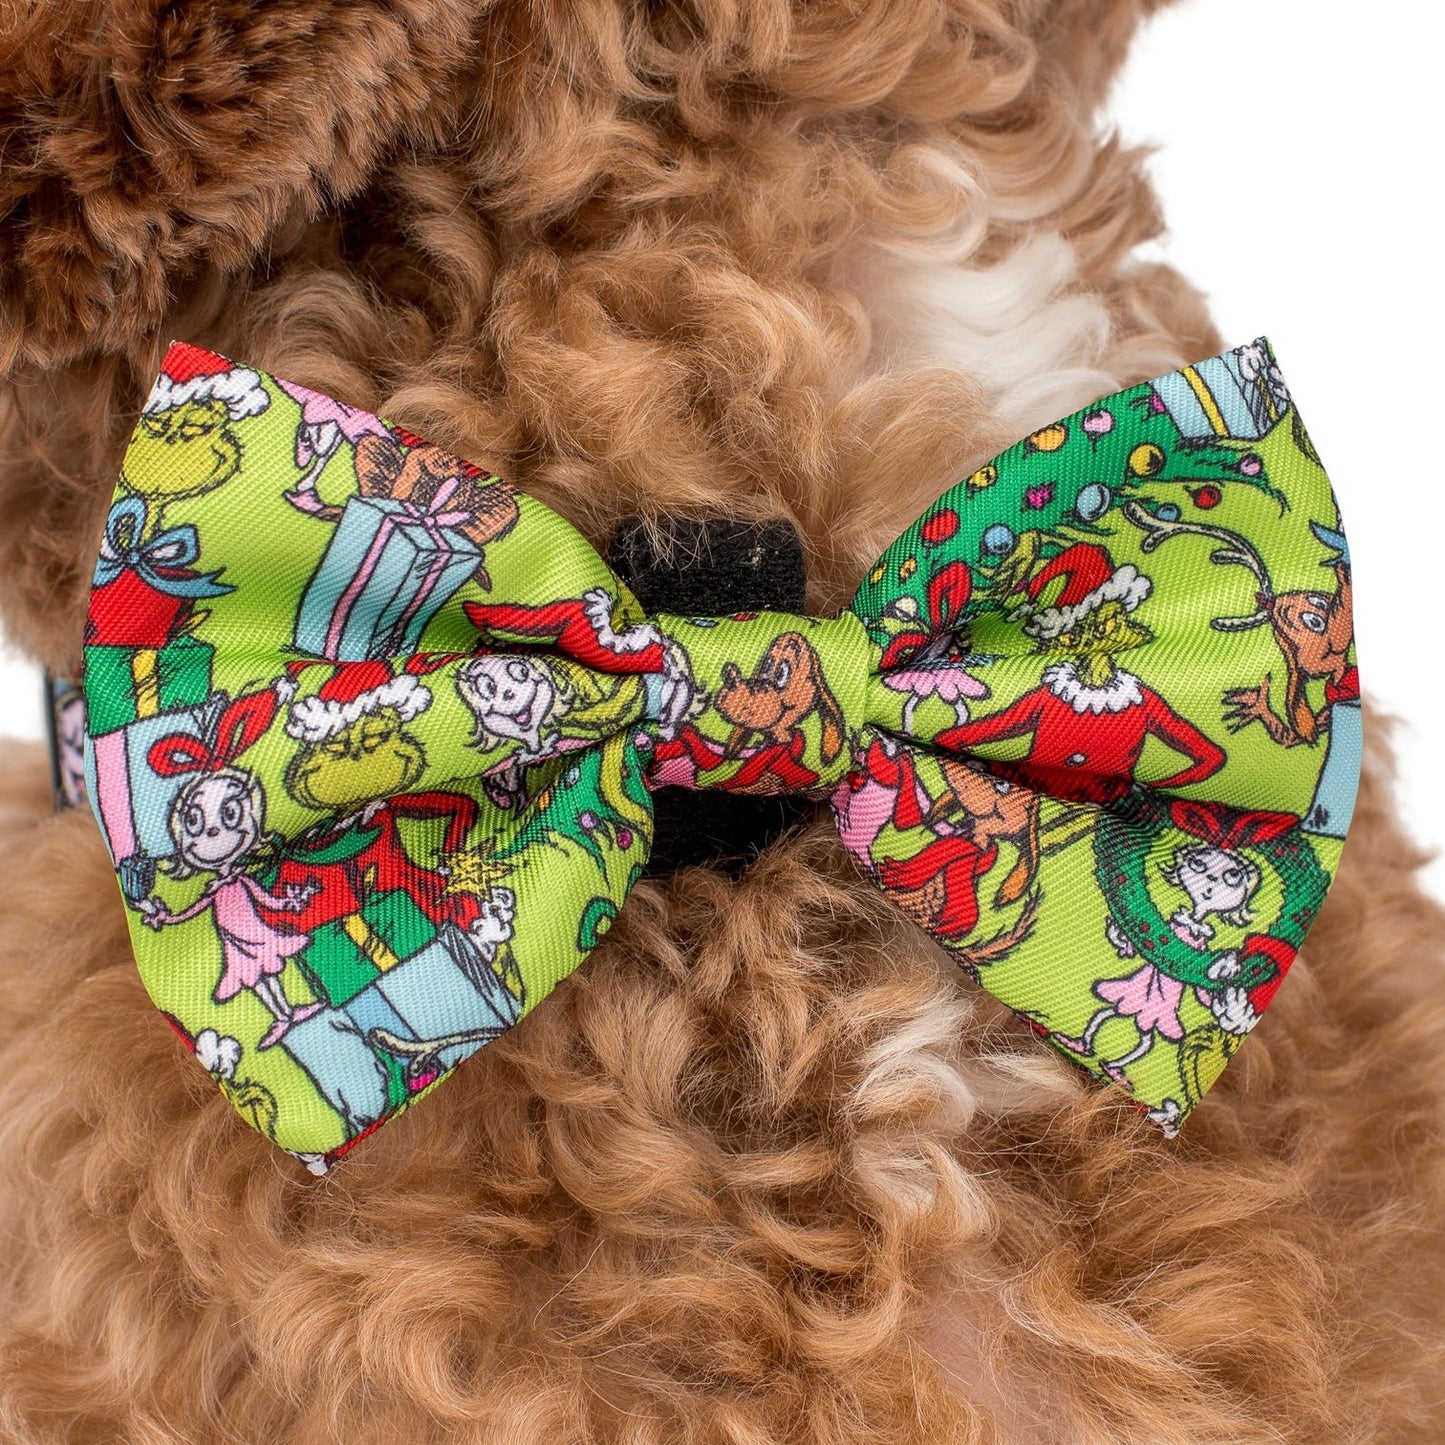 DR. SUESS' WHO-VILLE: BOW TIE